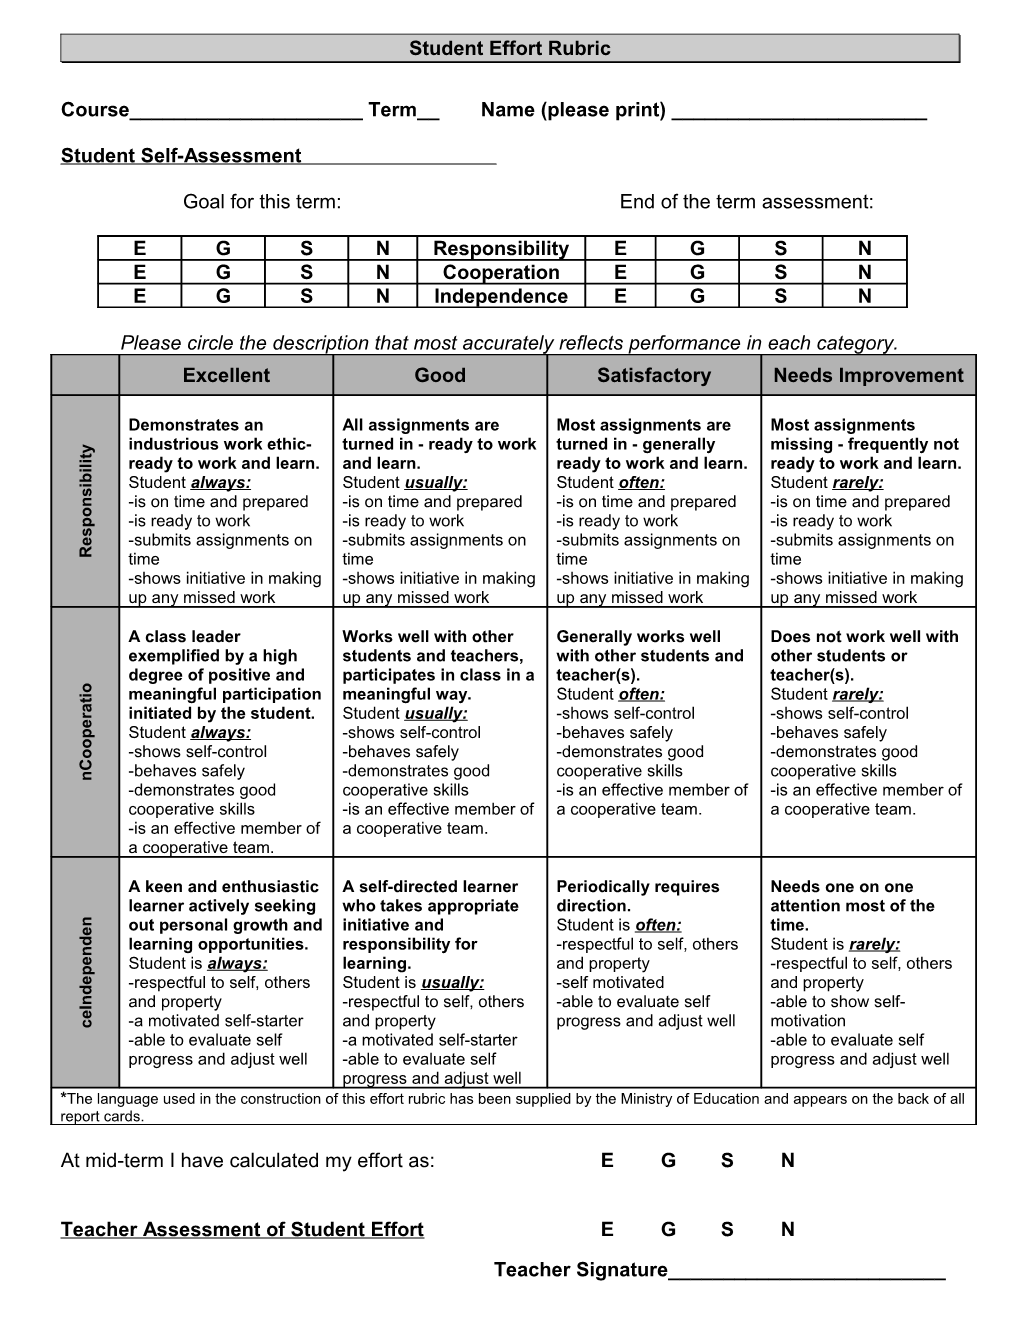 Tracking Student Learning with Effort Rubric